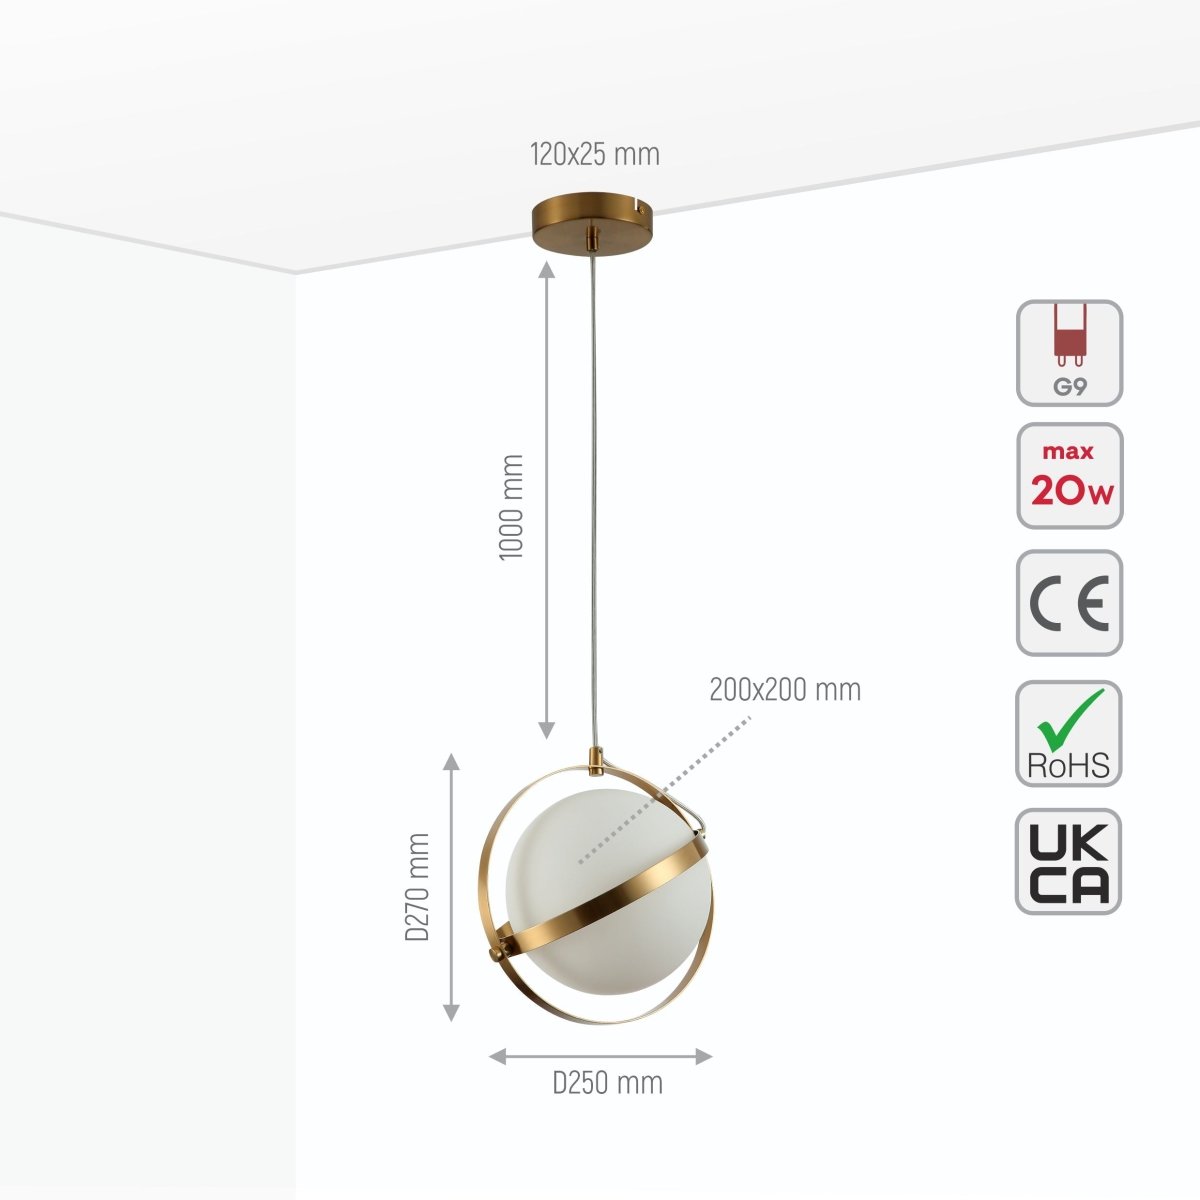 Size and specs of Opal Globe Glass Gold Rings Pendant Ceiling Light D200 with G9 Fitting | TEKLED 158-19596